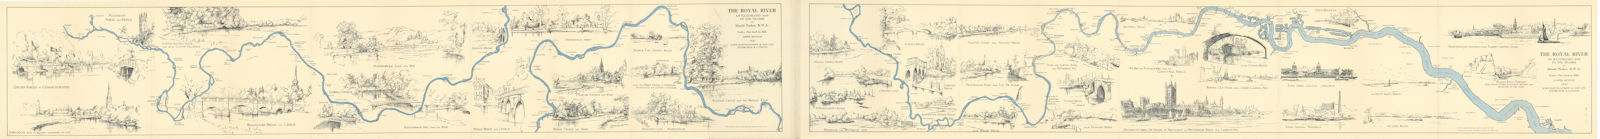 Associate Product The Royal River - An illustrated map of the Thames by Maude Parker 220x20cm 1937